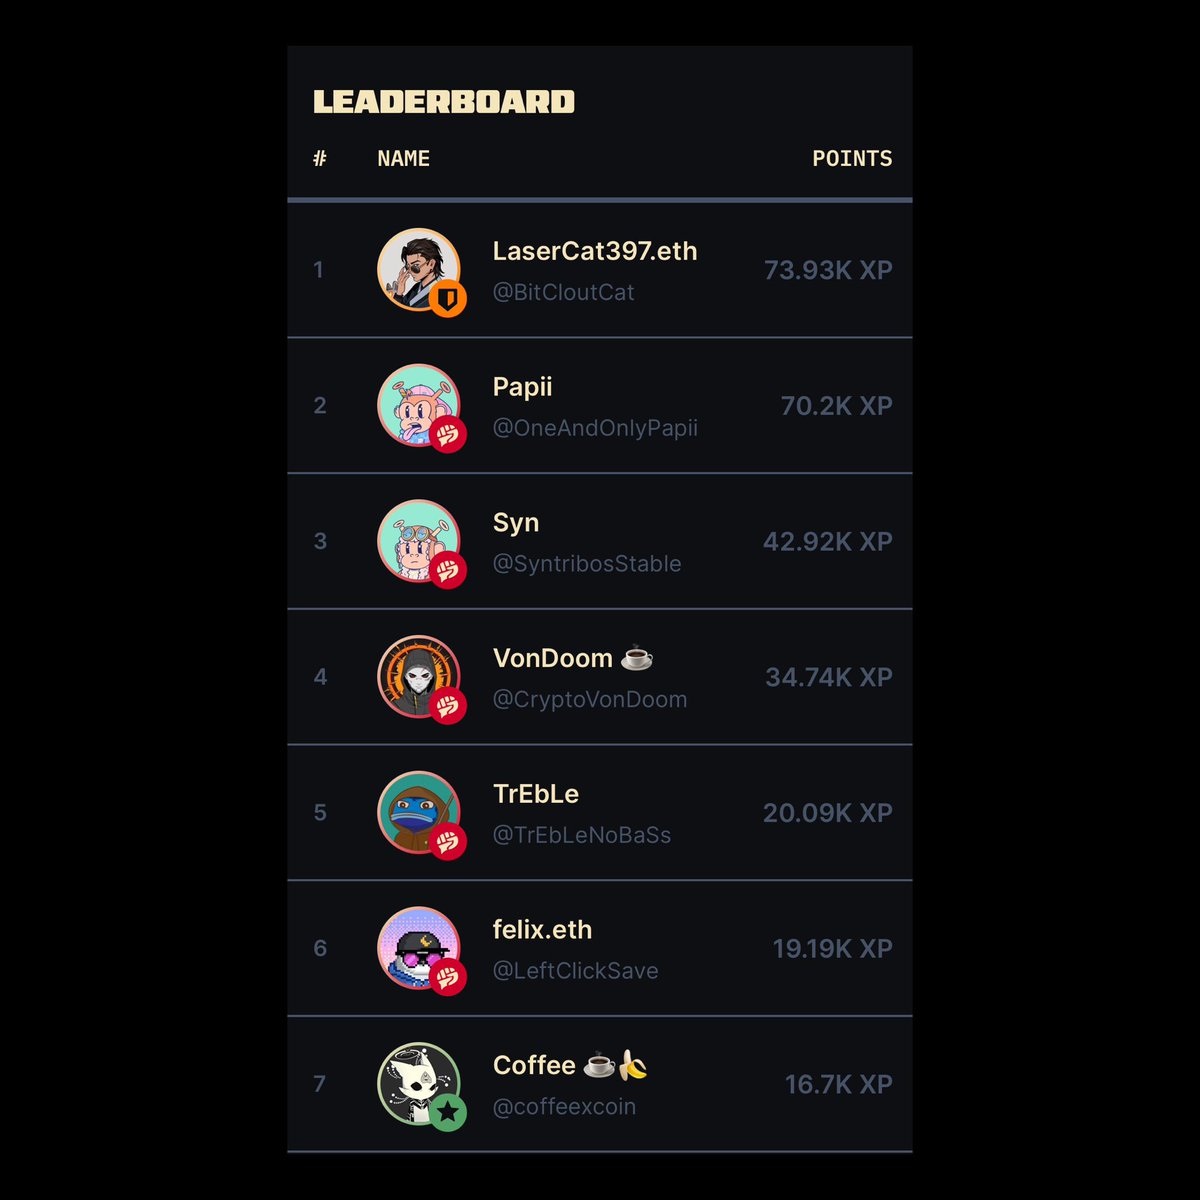 Wanted to thank all the awesome people that are part of the community we have built together! I am now 5th in terms of XP ranking over at @6079ai #6079ai aiming higher still #BeGood 

Get signed up below with my active referral code #RIBBIT

👇🏼👇🏼👇🏼👇🏼👇🏼👇🏼
6079.ai/?ref=5EEZOLQ0